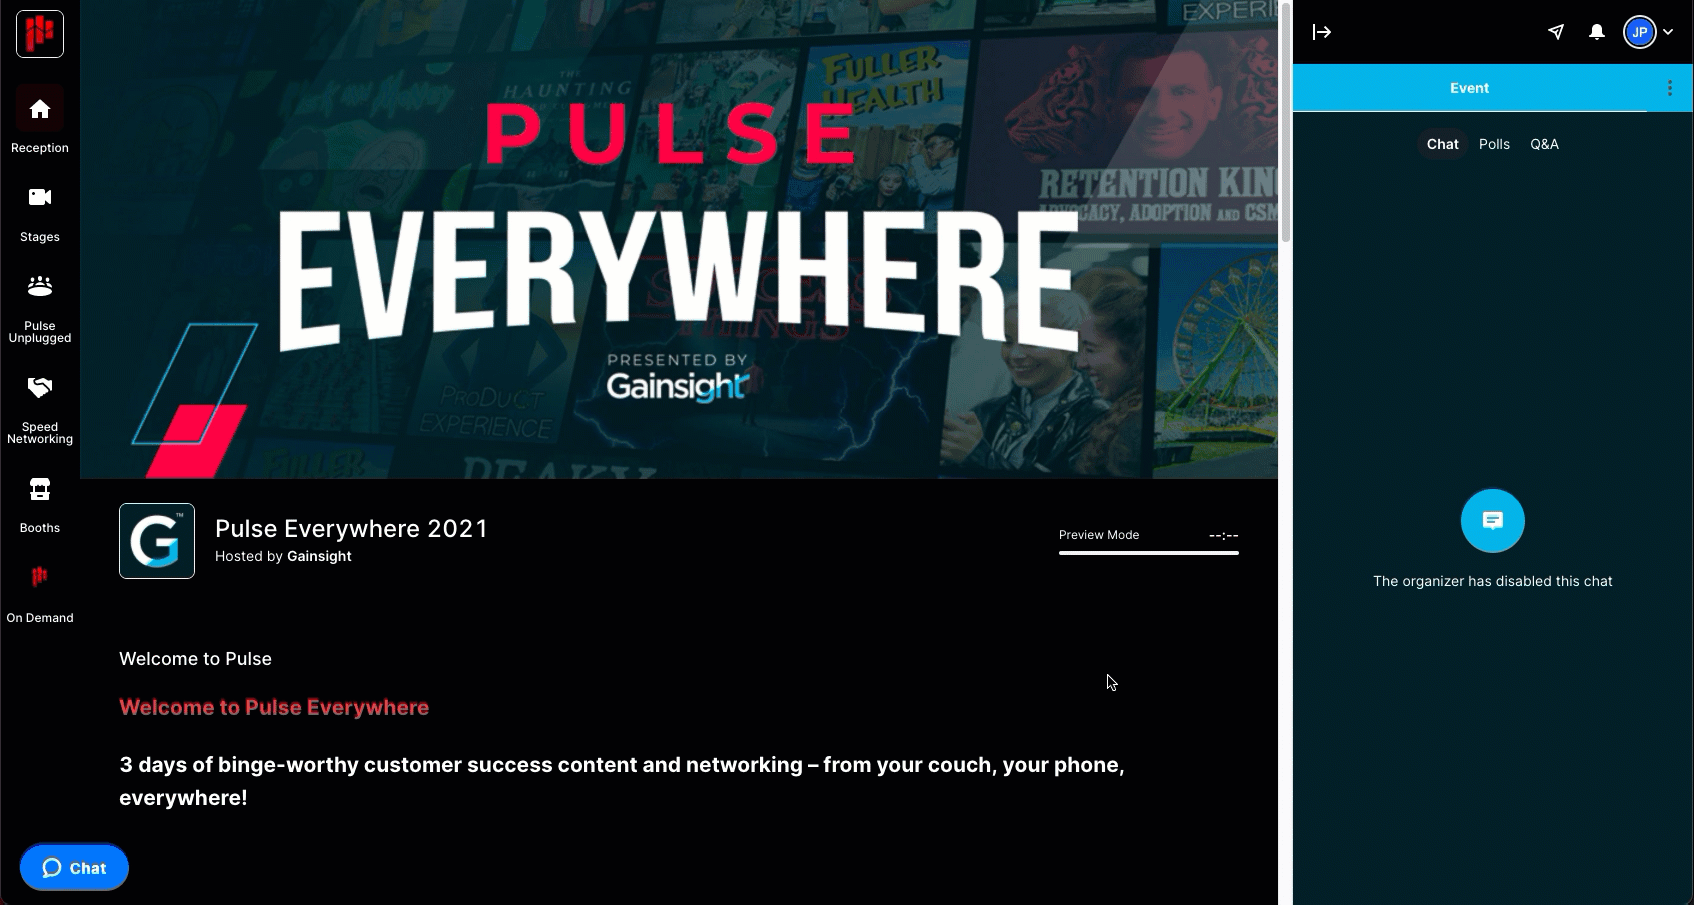 Pulse PX - Welcome Guide